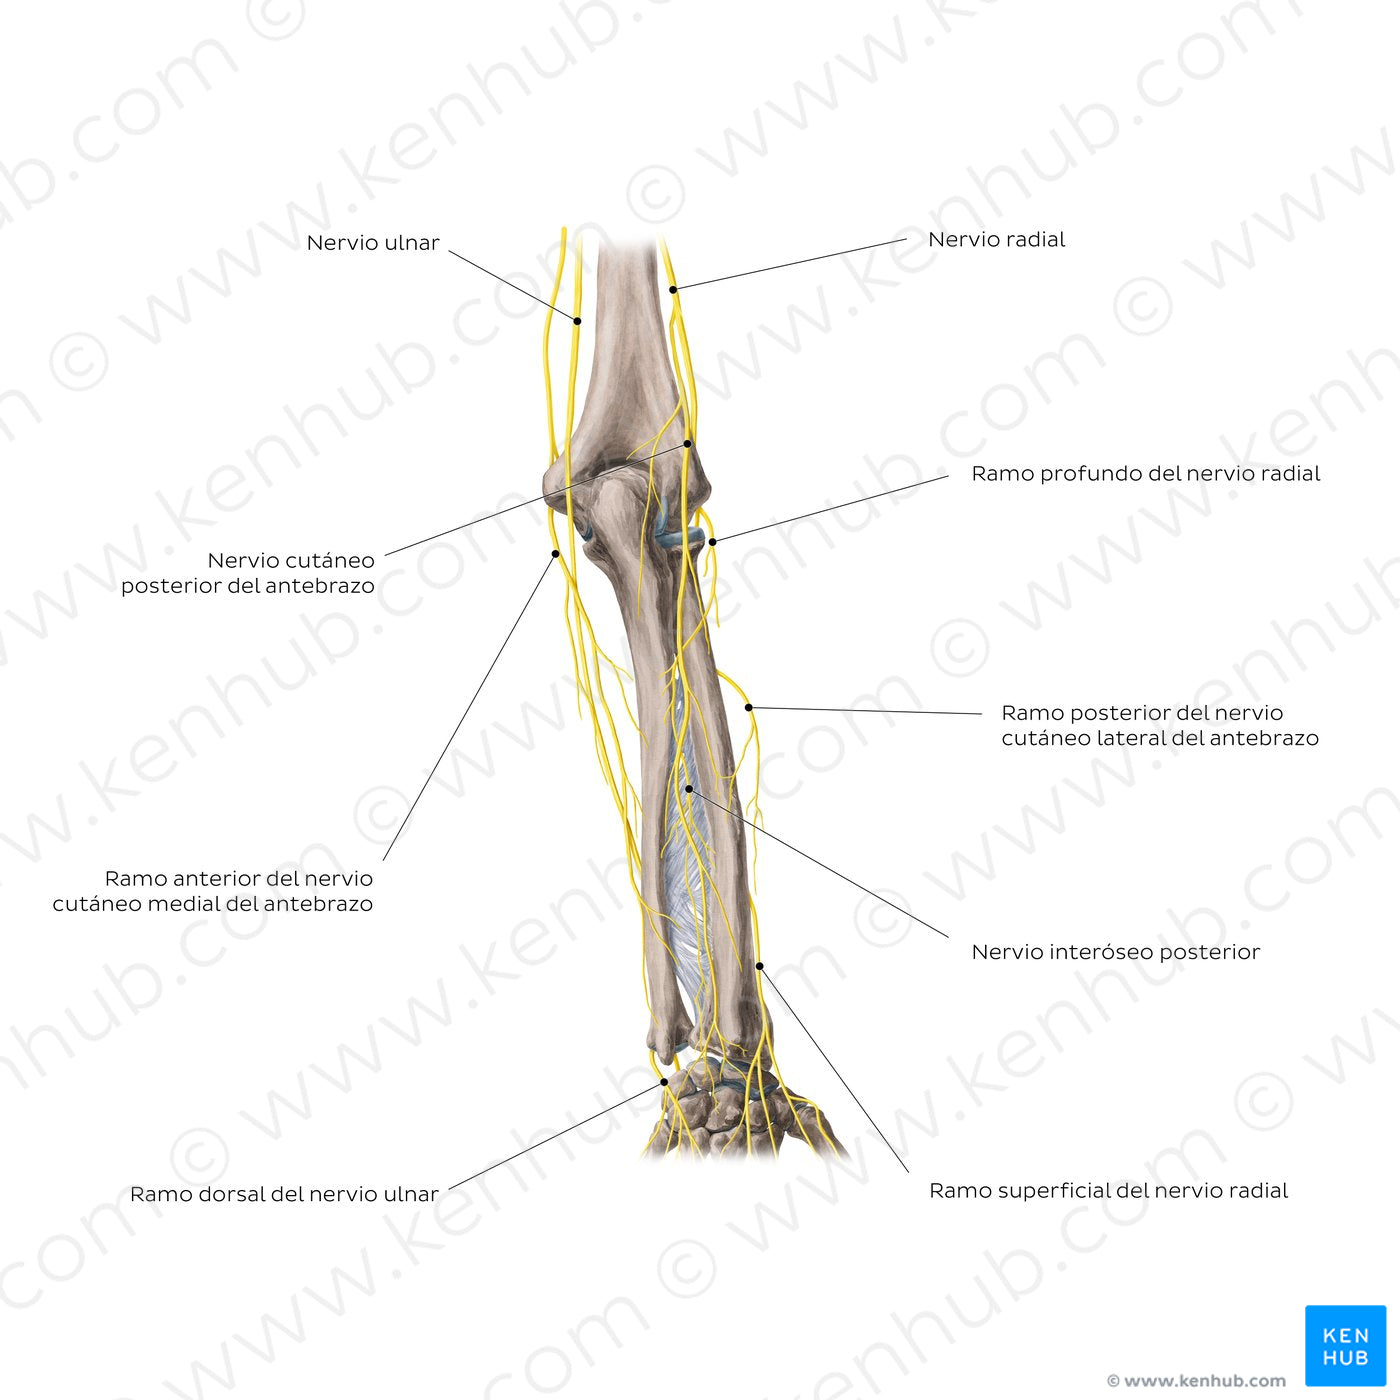 Nerves of the forearm: Posterior view (Spanish)